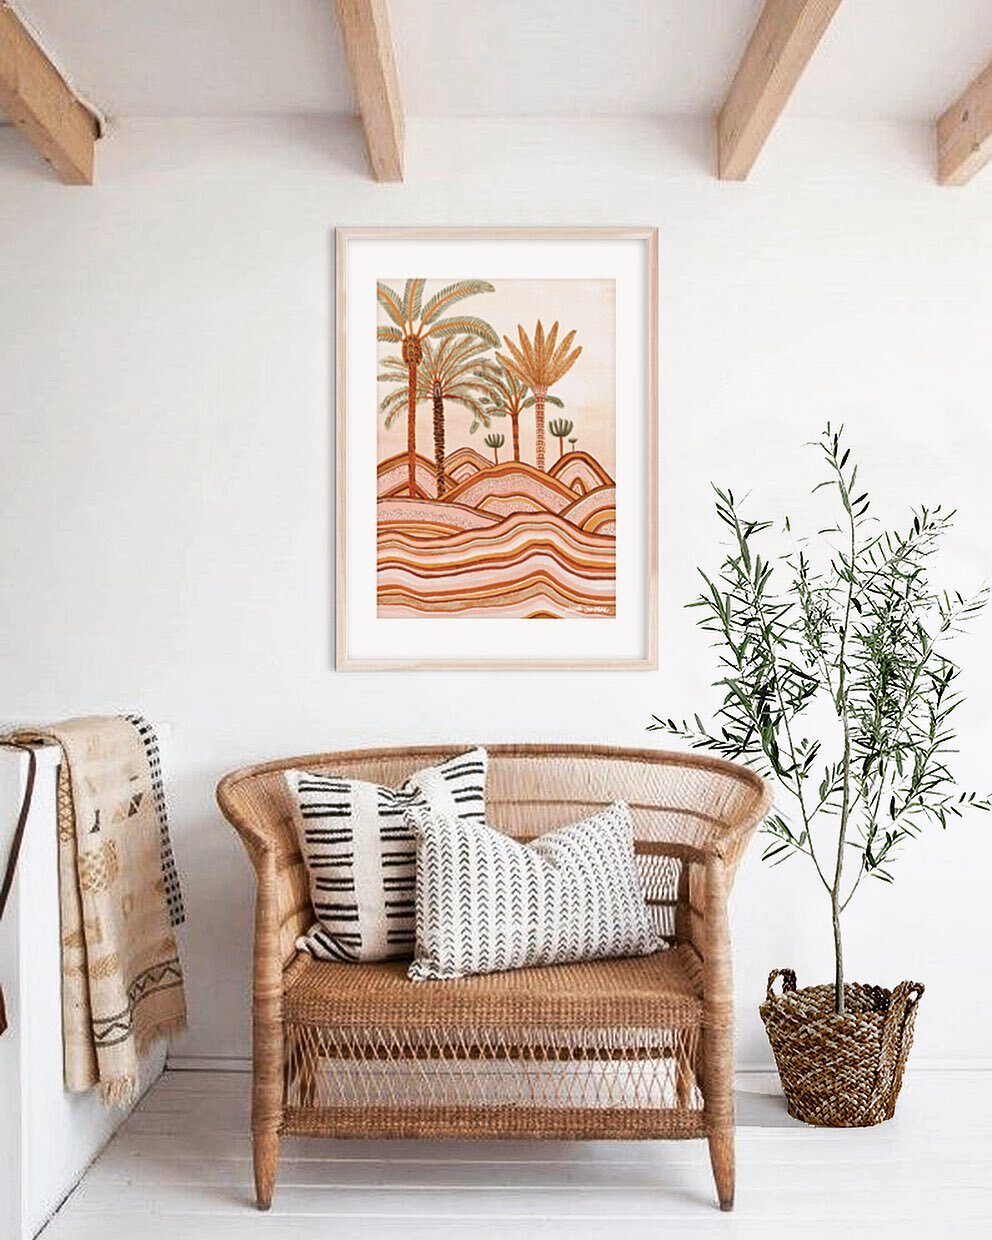 I&rsquo;m so obsessed with olive trees at the moment 🧡 they really make a room 🙌🏽🙌🏽🙌🏽

Featuring my Dusty Plains Fine Art Print (A1 size) custom framed in whitewash timber with 50mm mat board.